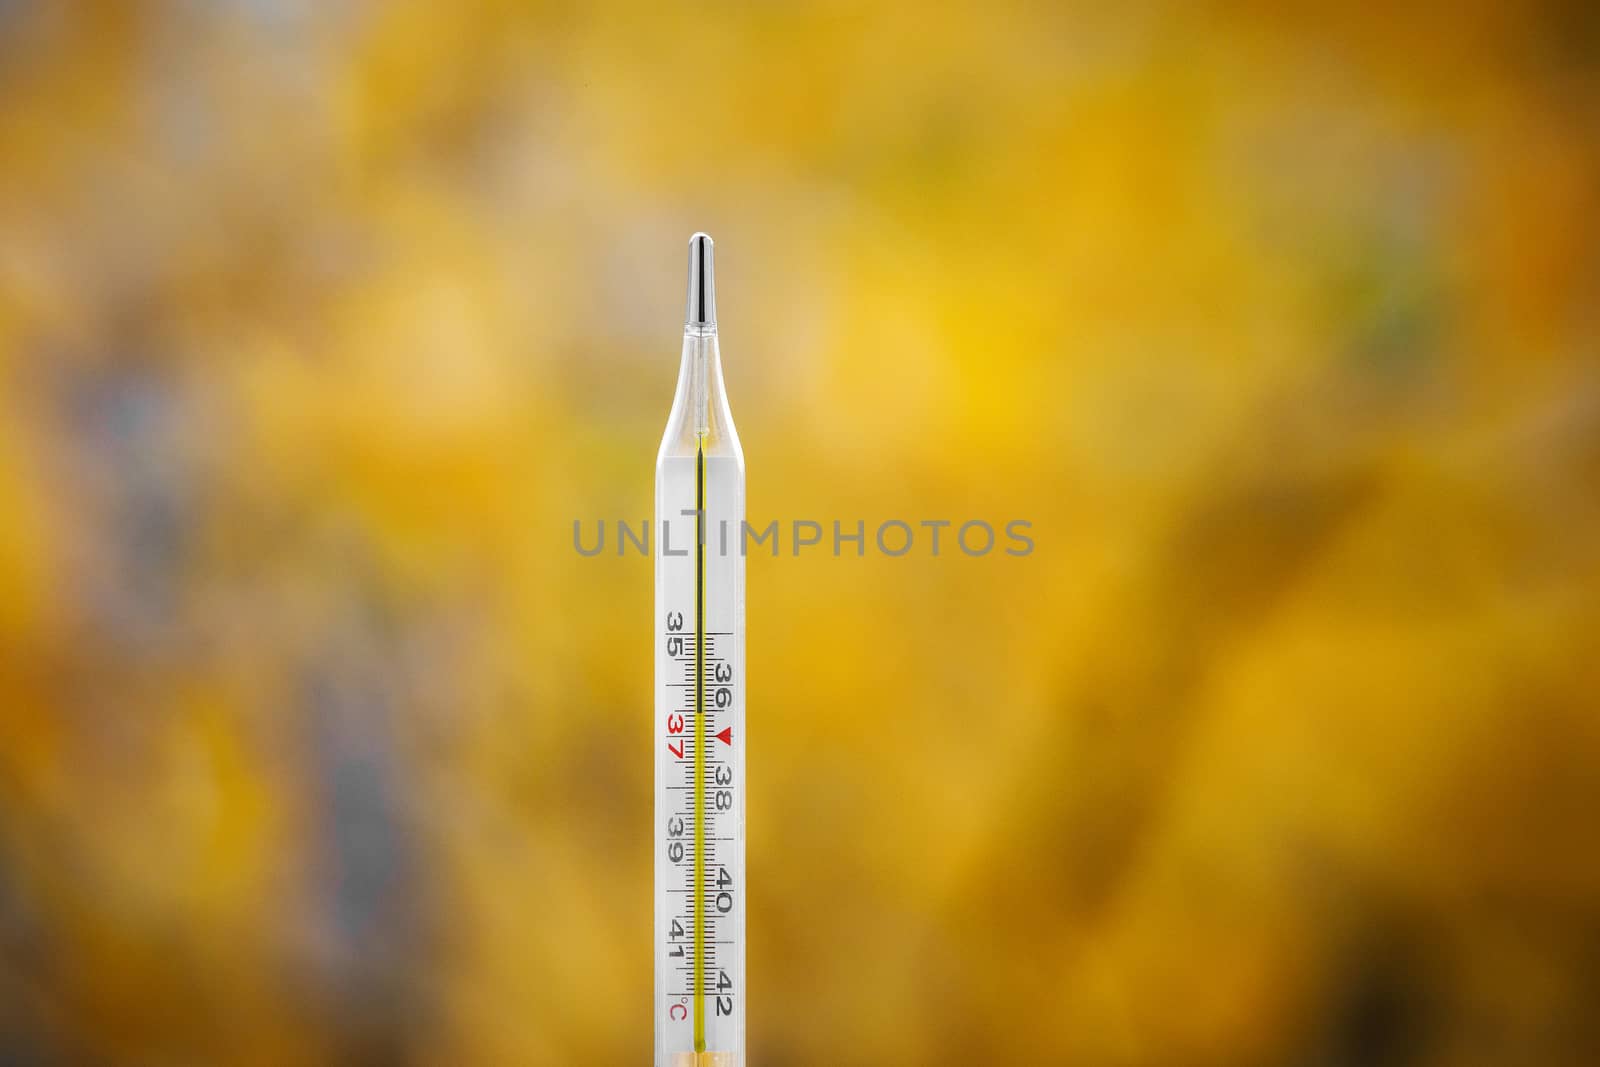 Mercury thermometer on an autumn background. The normal temperature of a healthy person is 36.6.